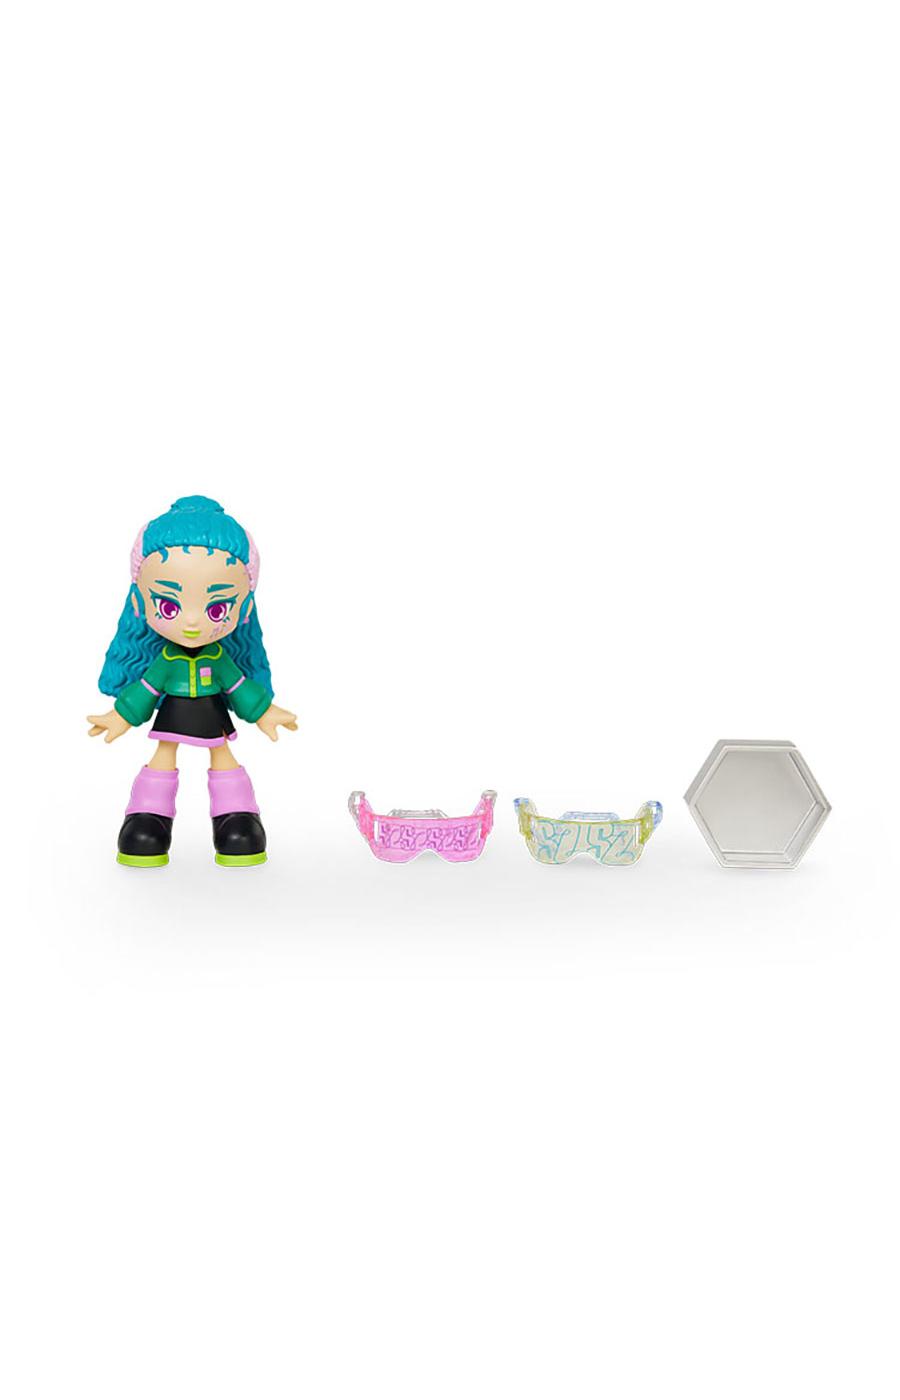 Squadz Place Tokyo Trends Collectible Doll; image 6 of 11